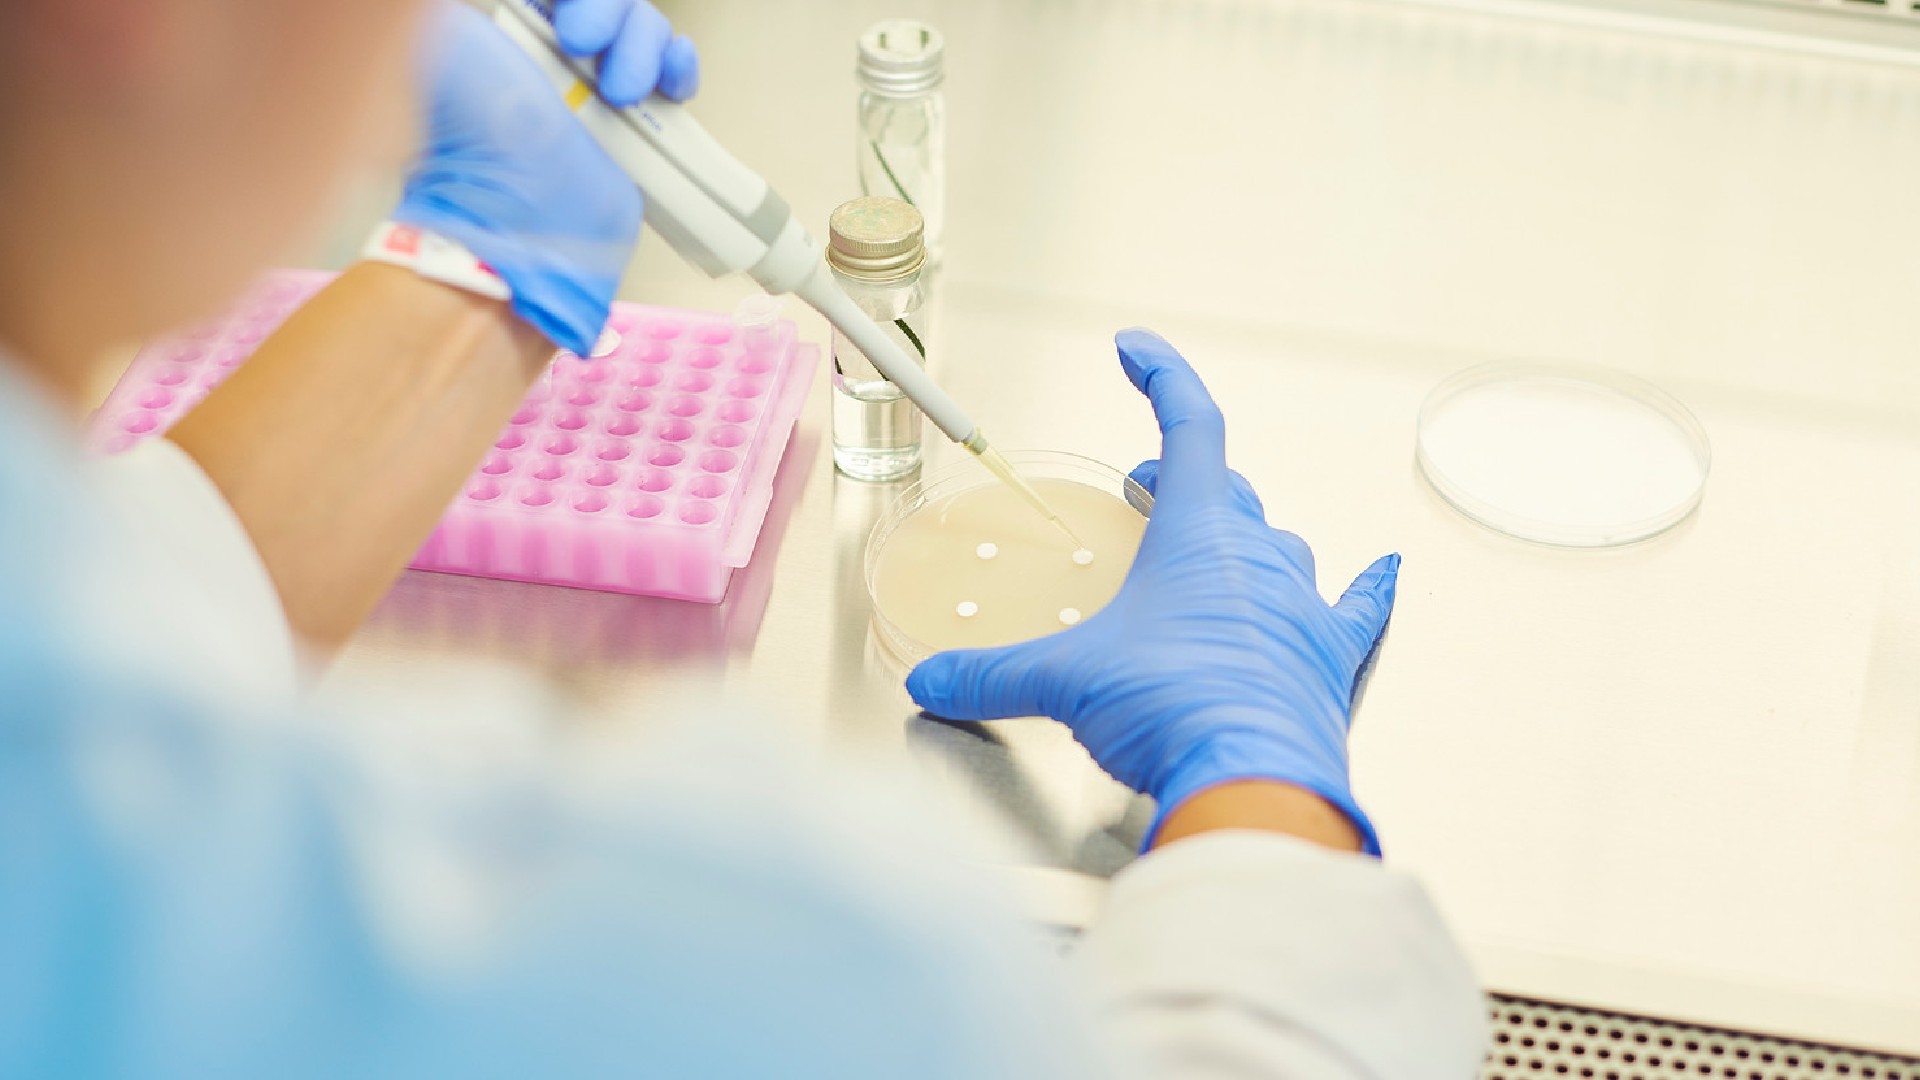 Over the shoulder image of someone using a pipette and lab equipment